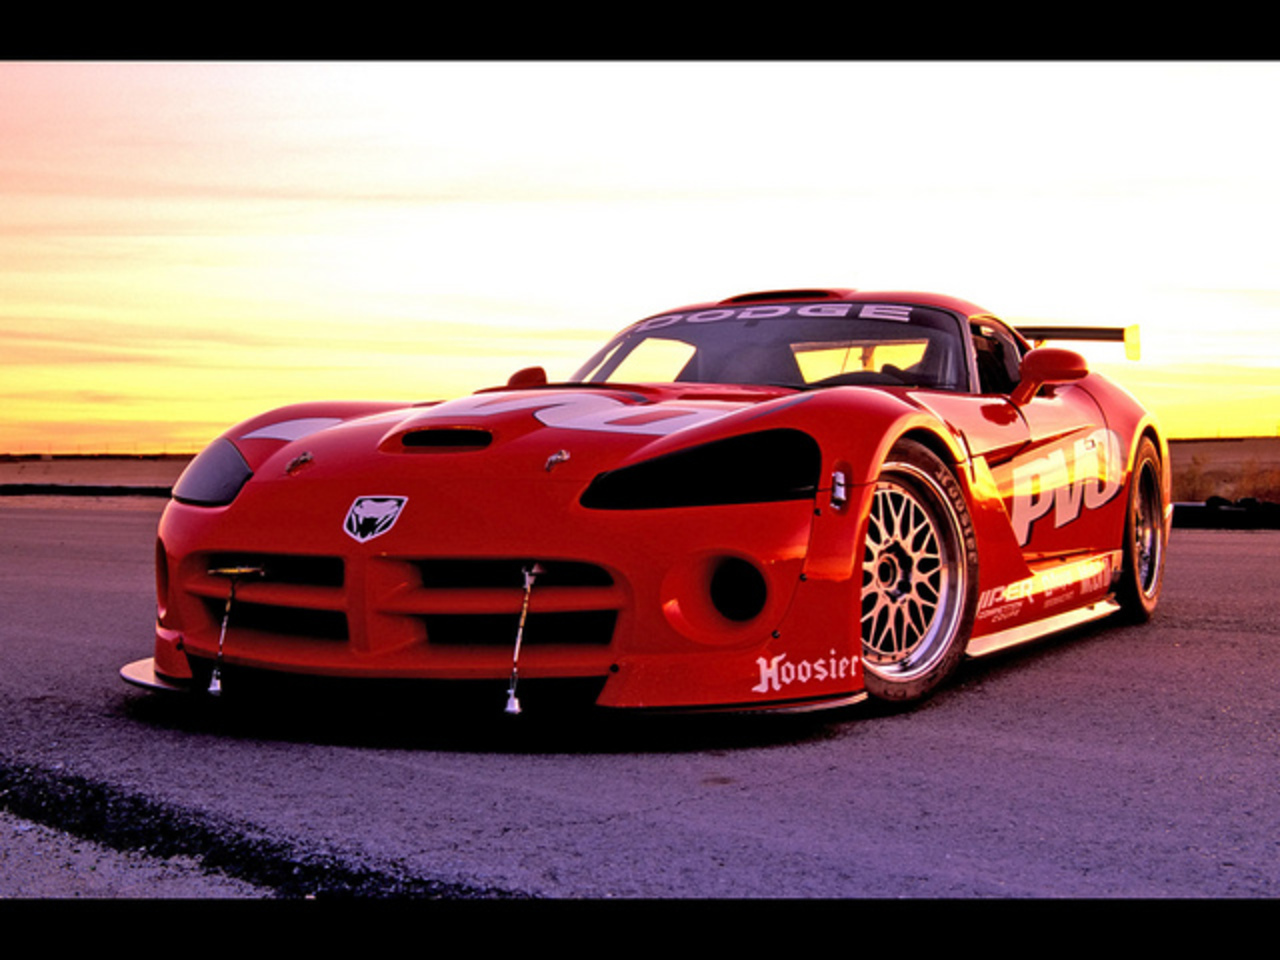 2003 Dodge Viper Coupe | Flickr - Photo Sharing!